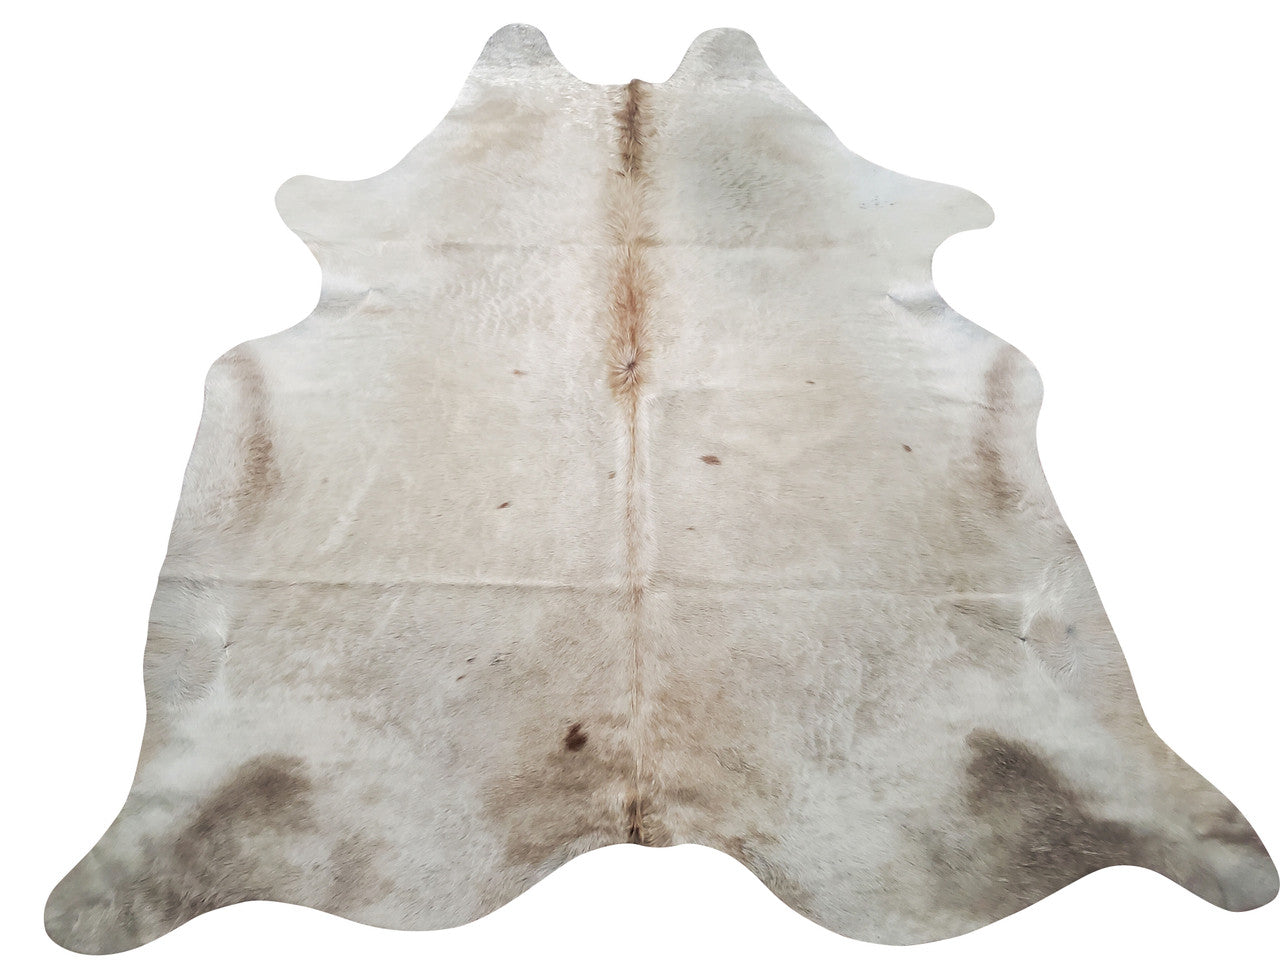 This ethical cowhide rug will be so striking in any room and for that reason you will love it!